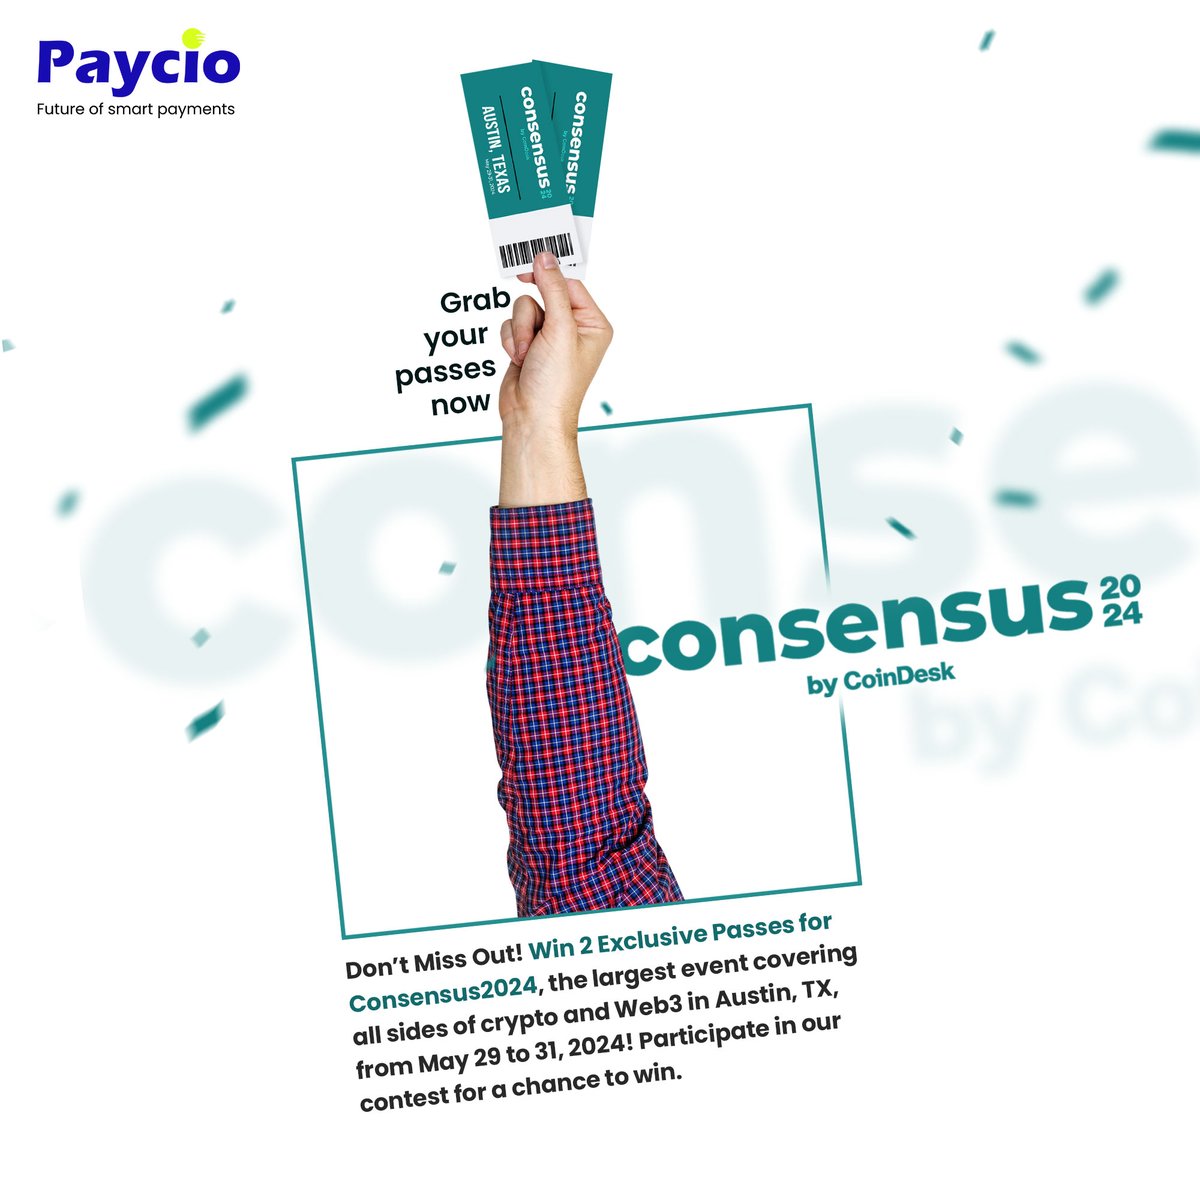 Hey, Crypto Enthusiasts! Hurry up, you have less time! Win 2 exclusive passes for #Consensus2024 in Austin, Texas! Join our Telegram, download the Paycio app, and share with #PaycioContest post a screenshot in our Telegram Community. Winners announced on May 27 and those lucky